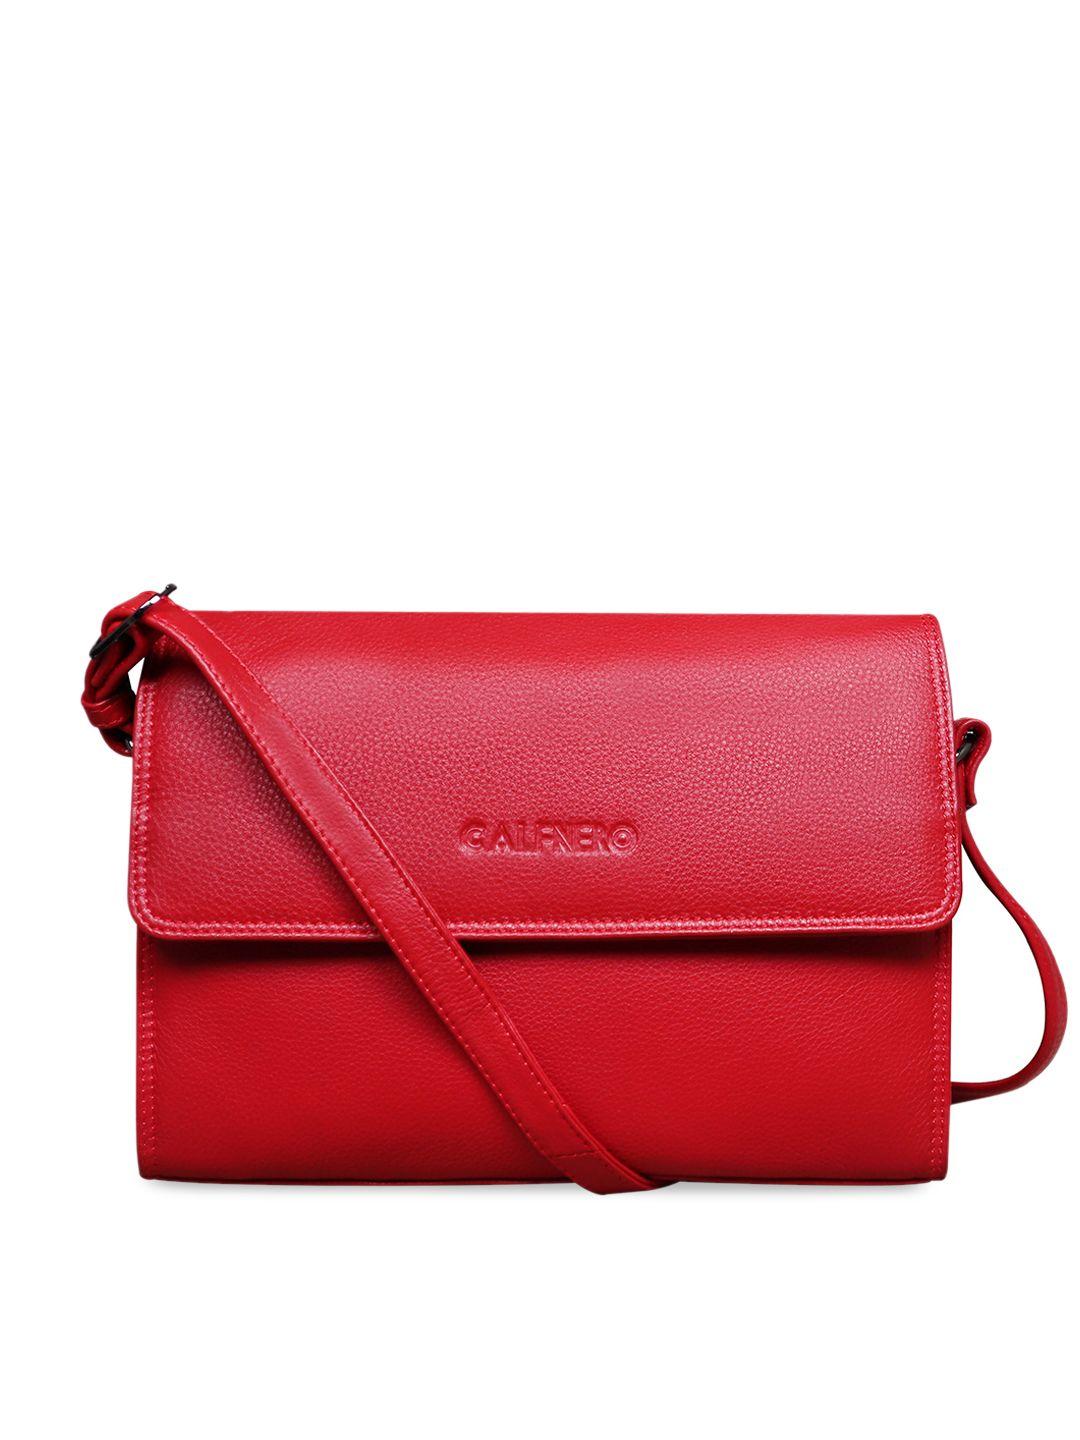 calfnero women red leather structured sling bag